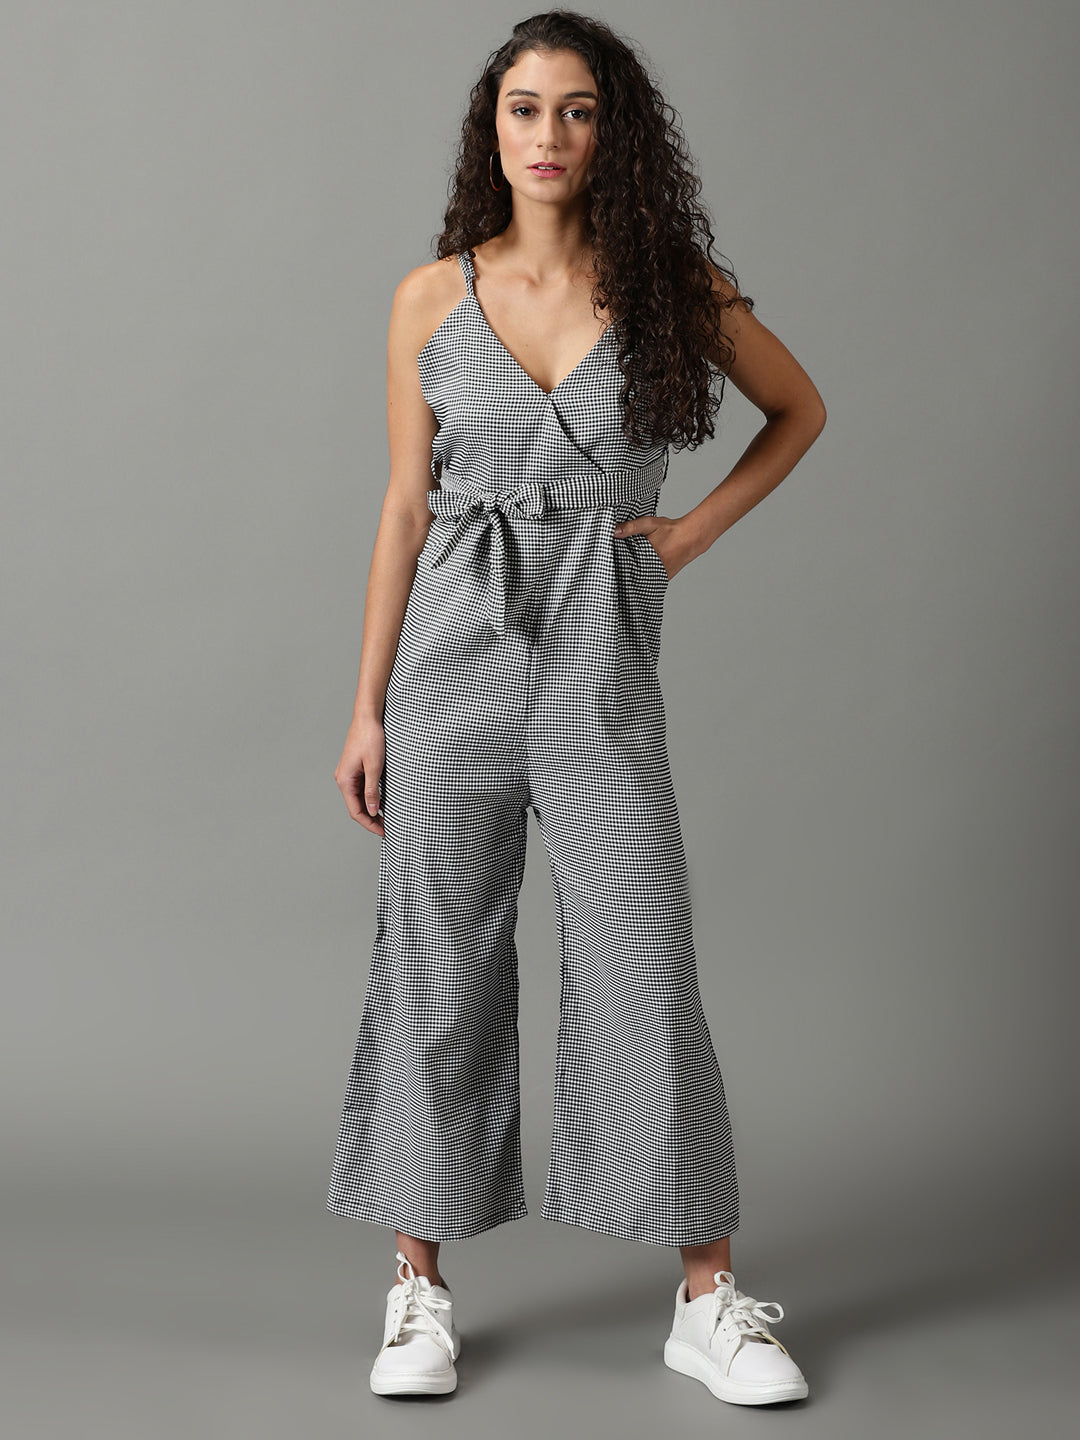 Women's White Checked Jumpsuit